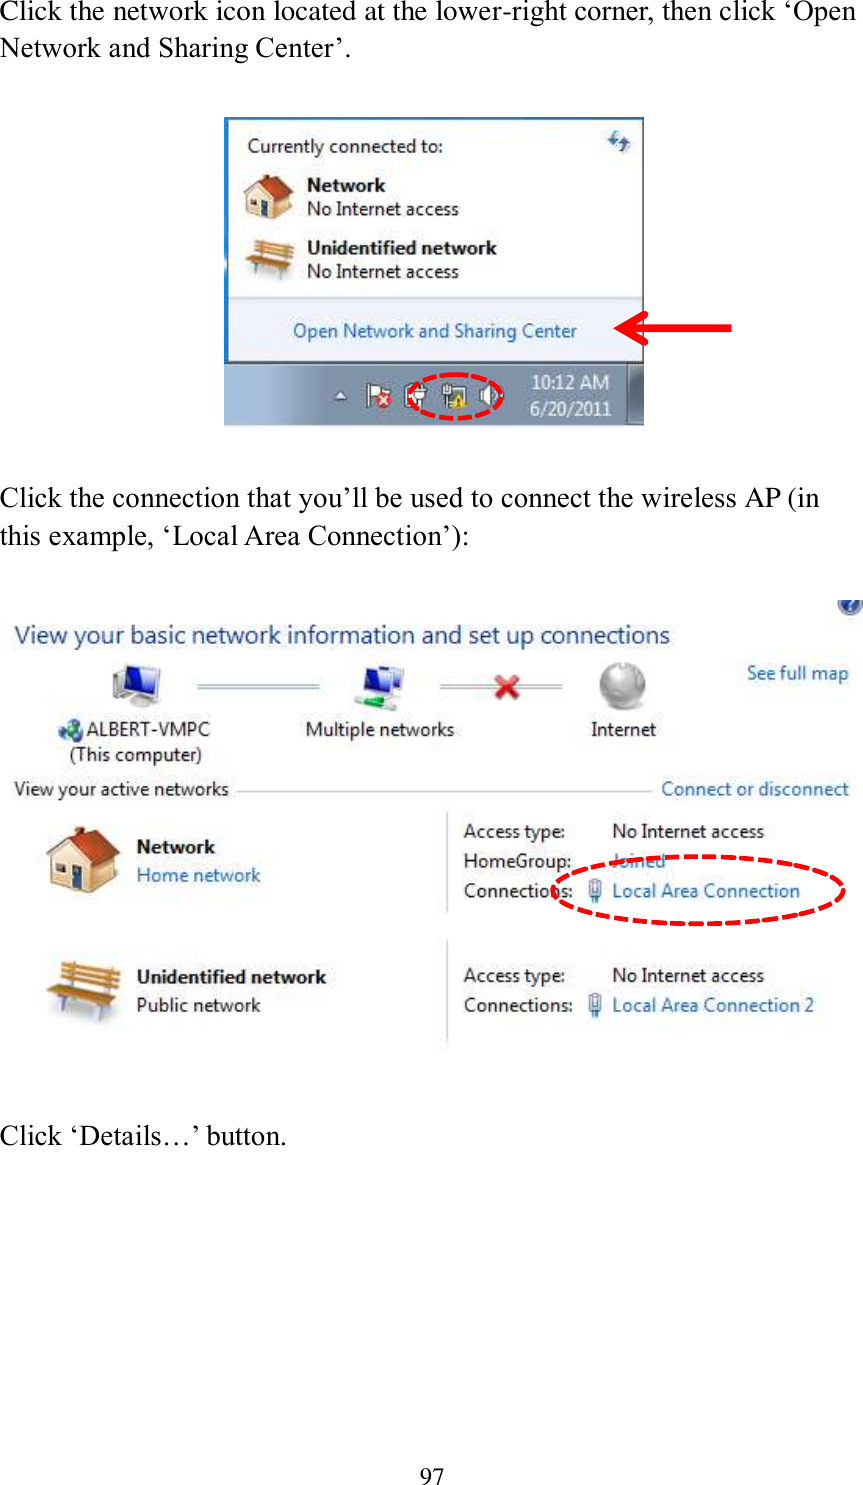 97 Click the network icon located at the lower-right corner, then click ‘Open Network and Sharing Center’.    Click the connection that you’ll be used to connect the wireless AP (in this example, ‘Local Area Connection’):    Click ‘Details…’ button. 